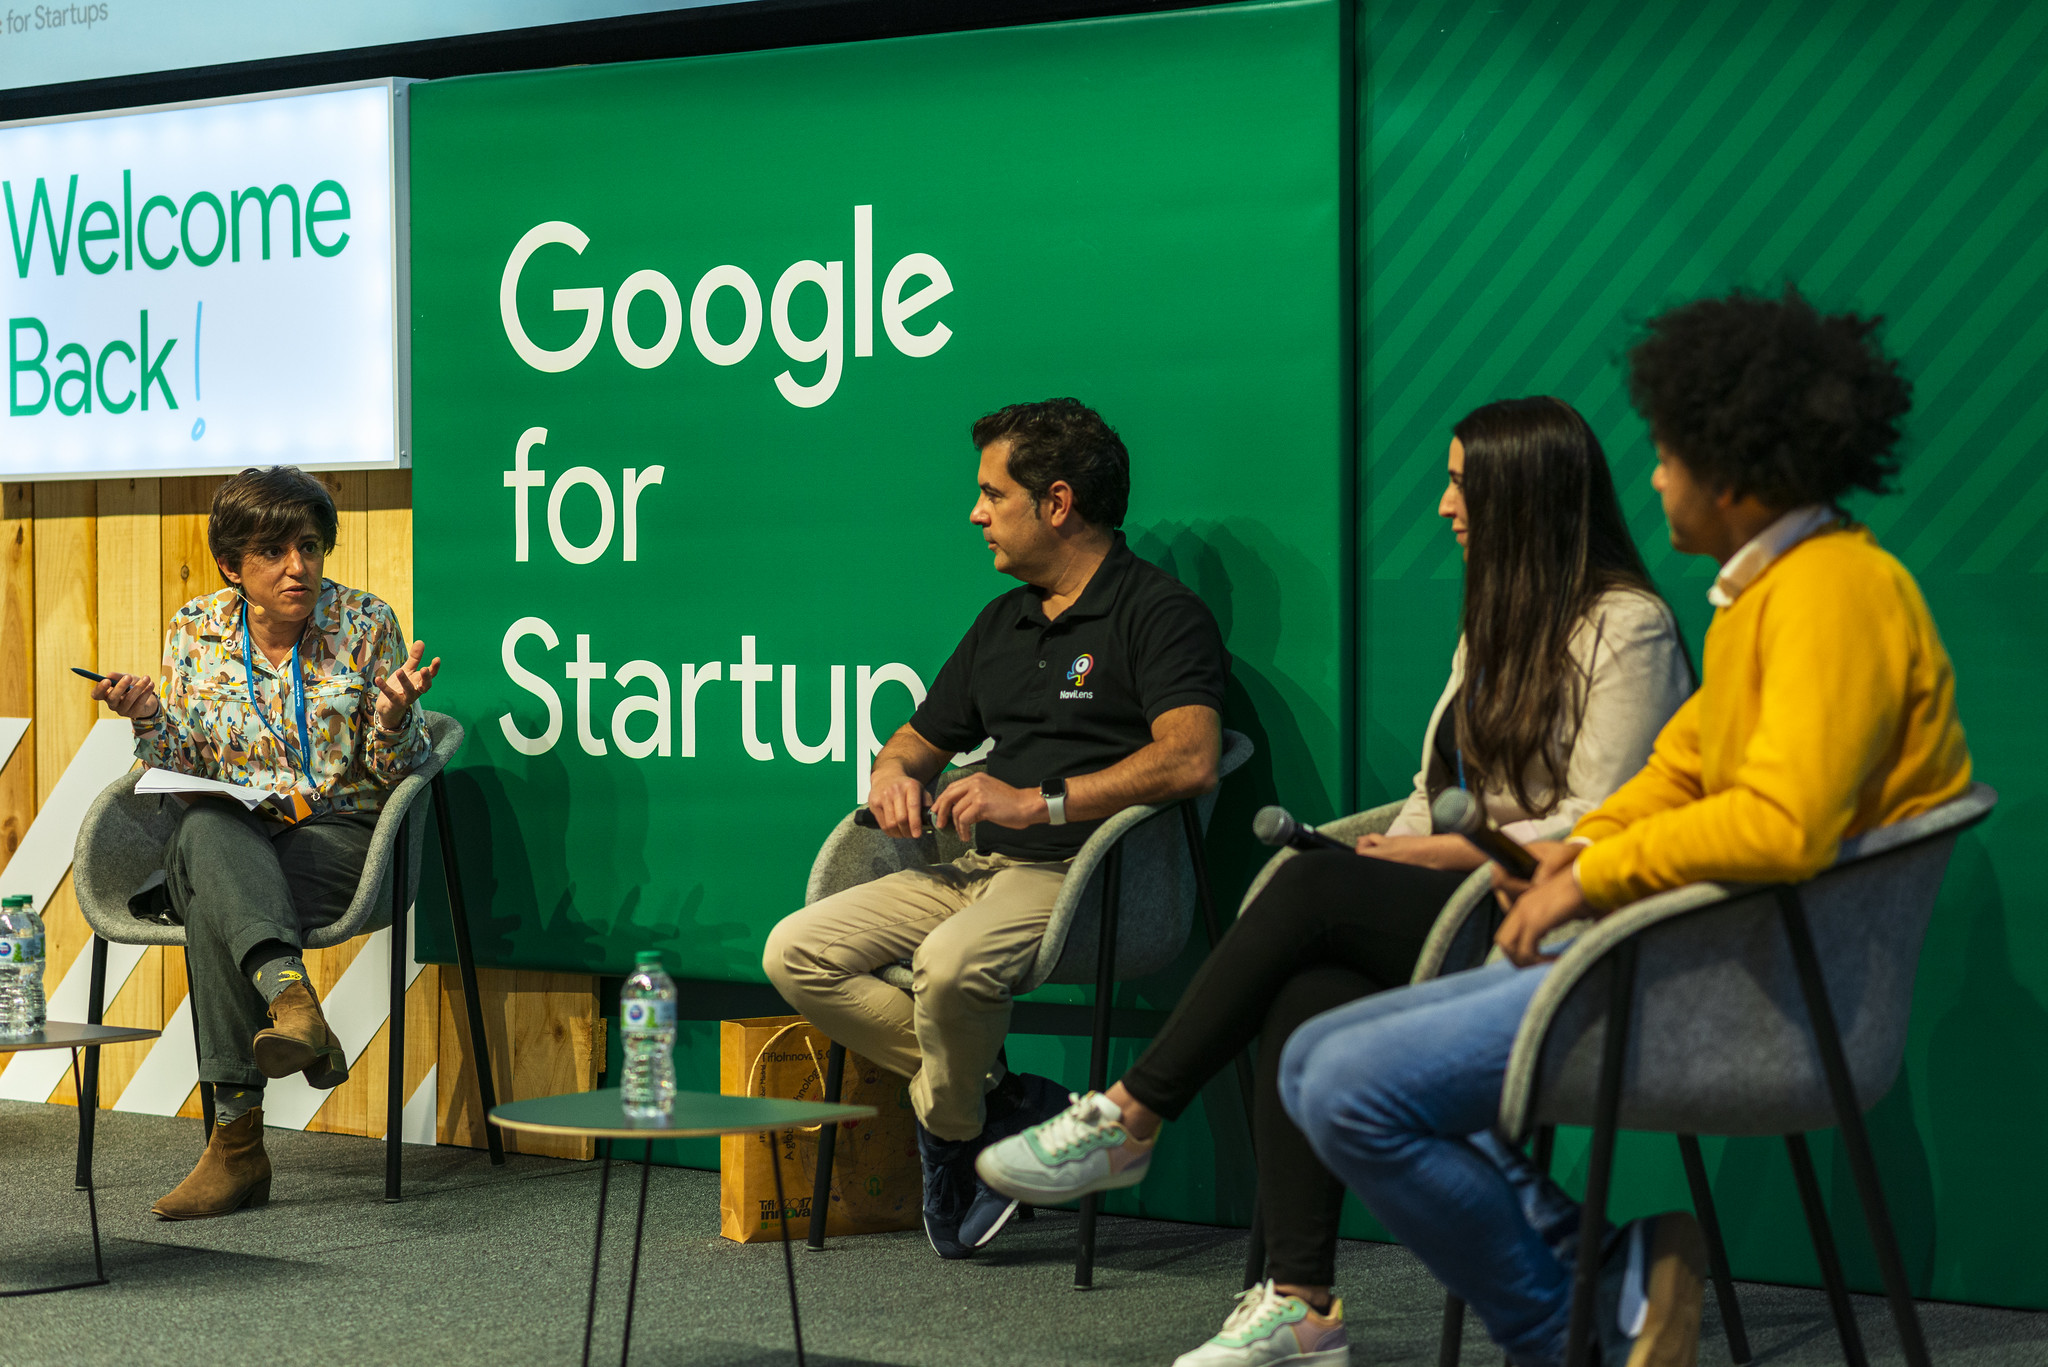 Group of people on a stage in panel format talking. Background a green wall that says "Google for Startup"